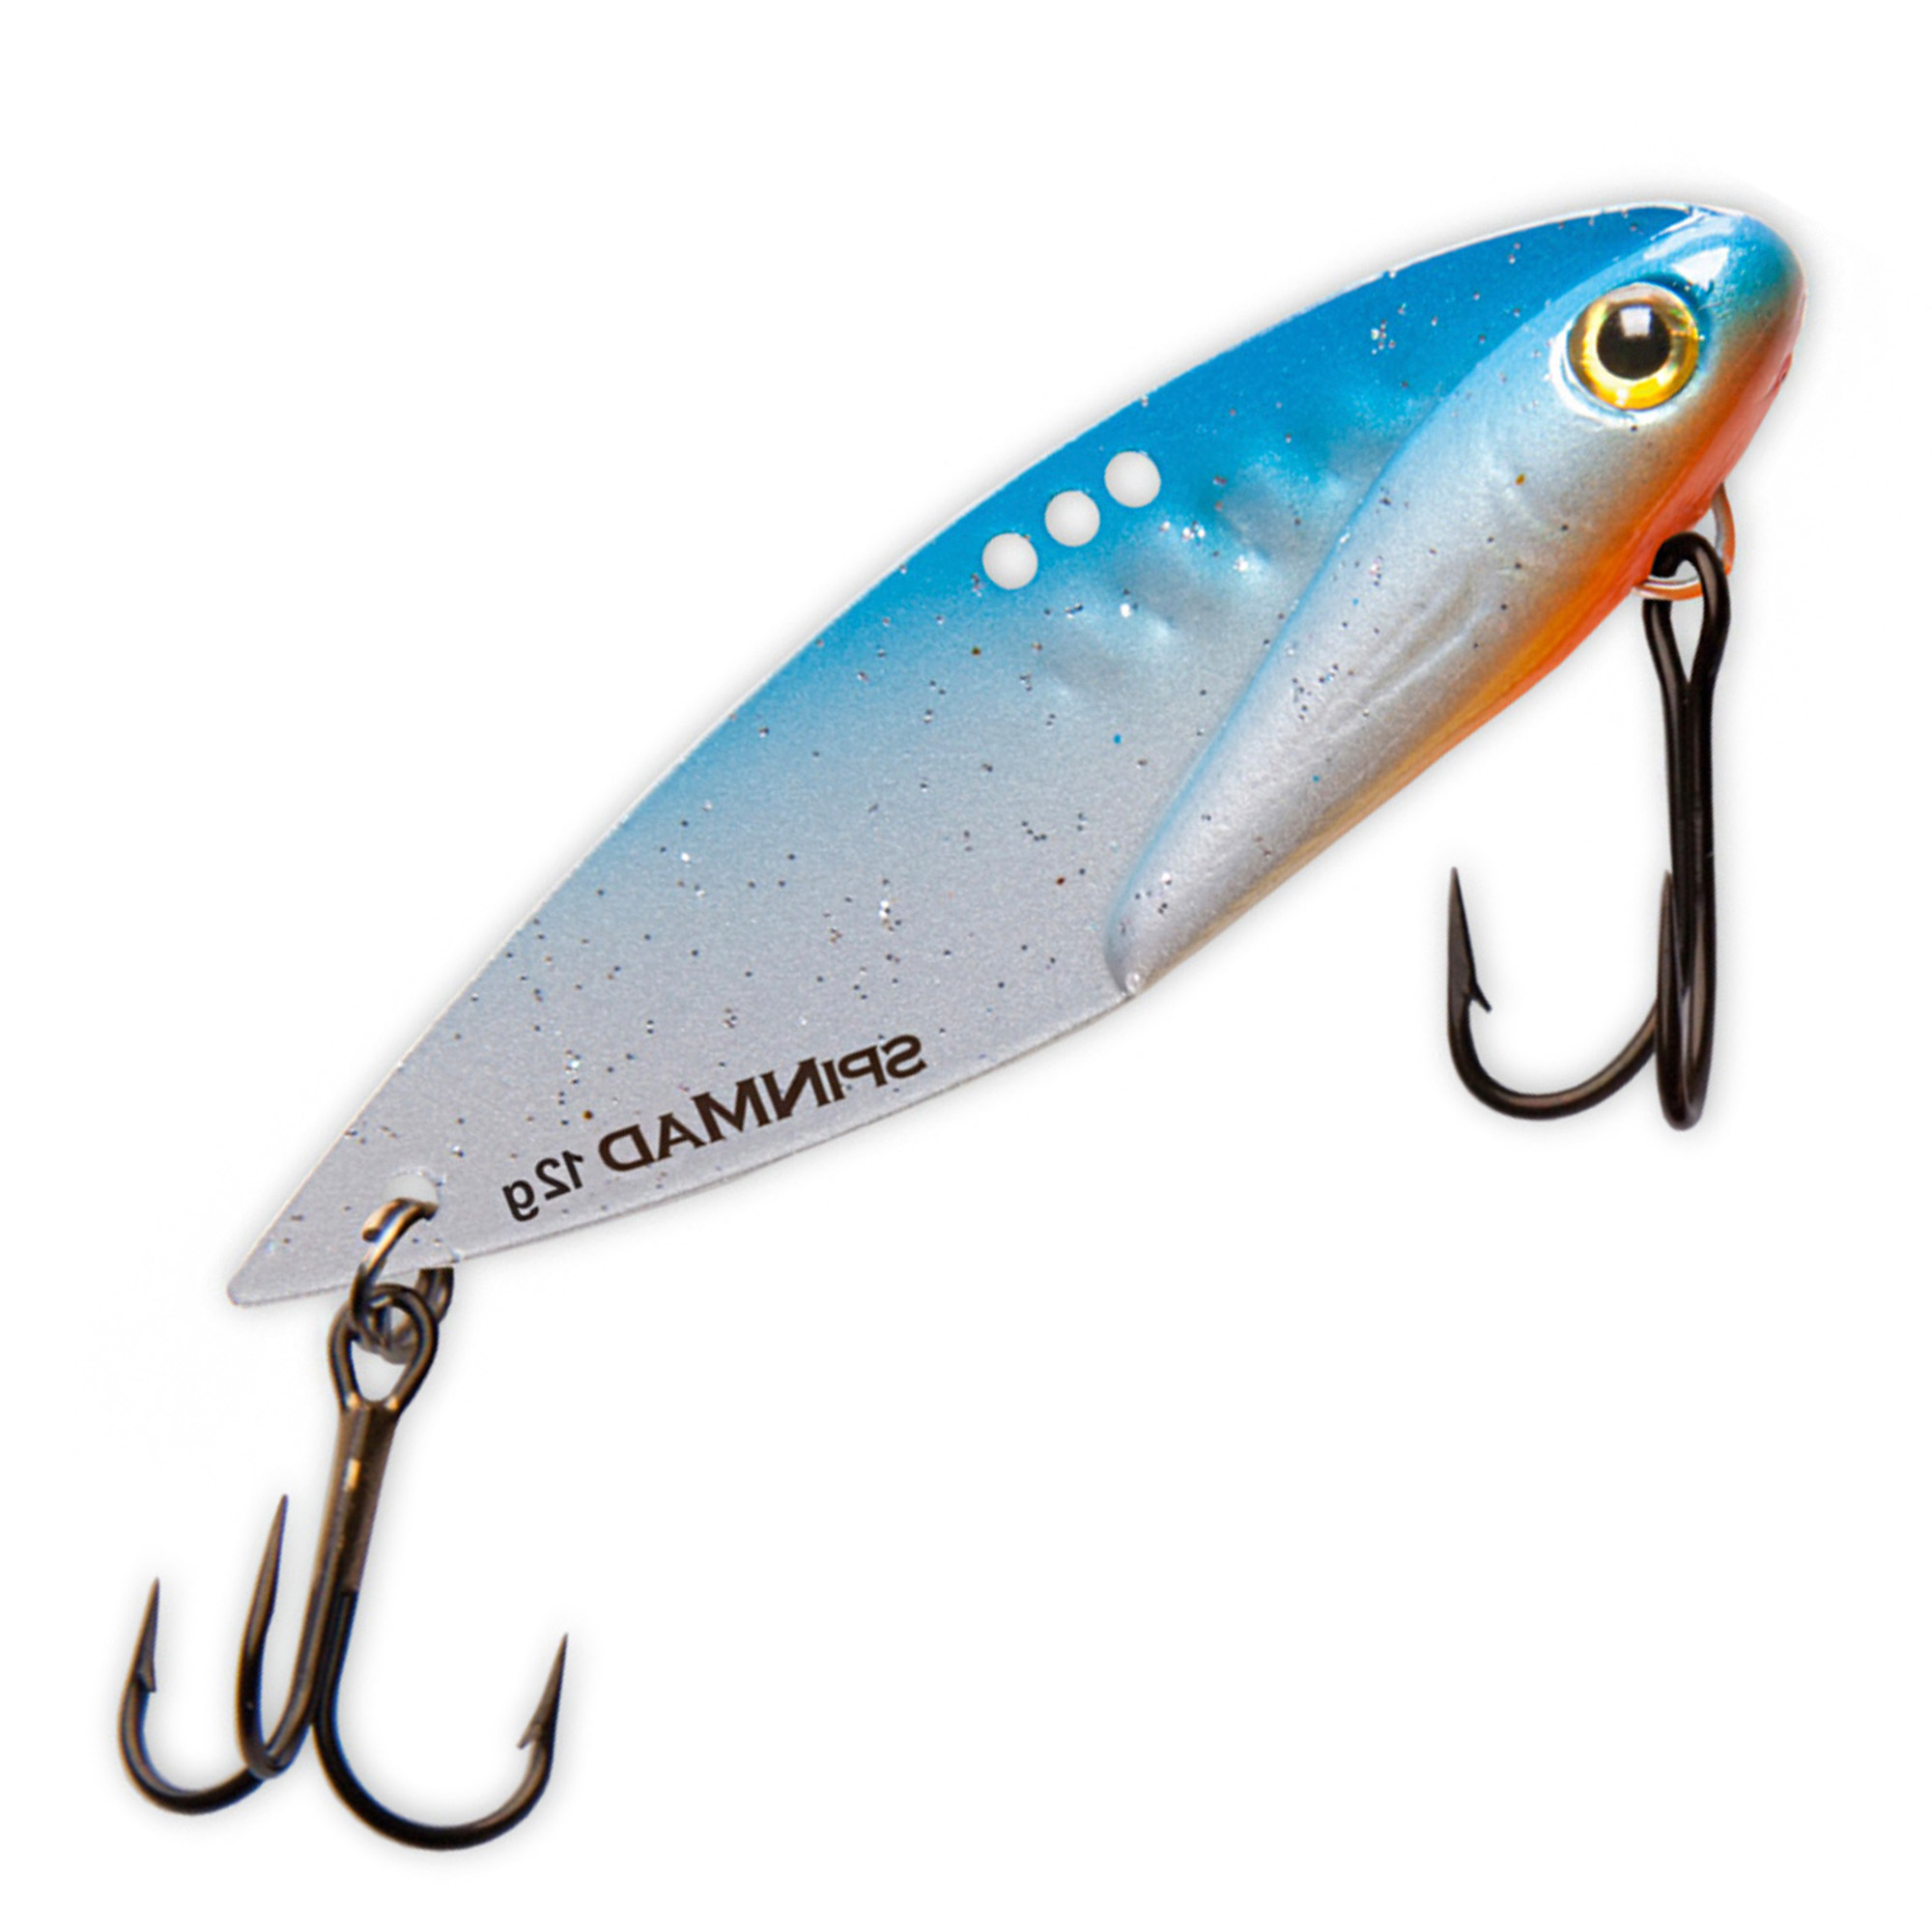 Spinmad King 12 G Blade Bait 1605